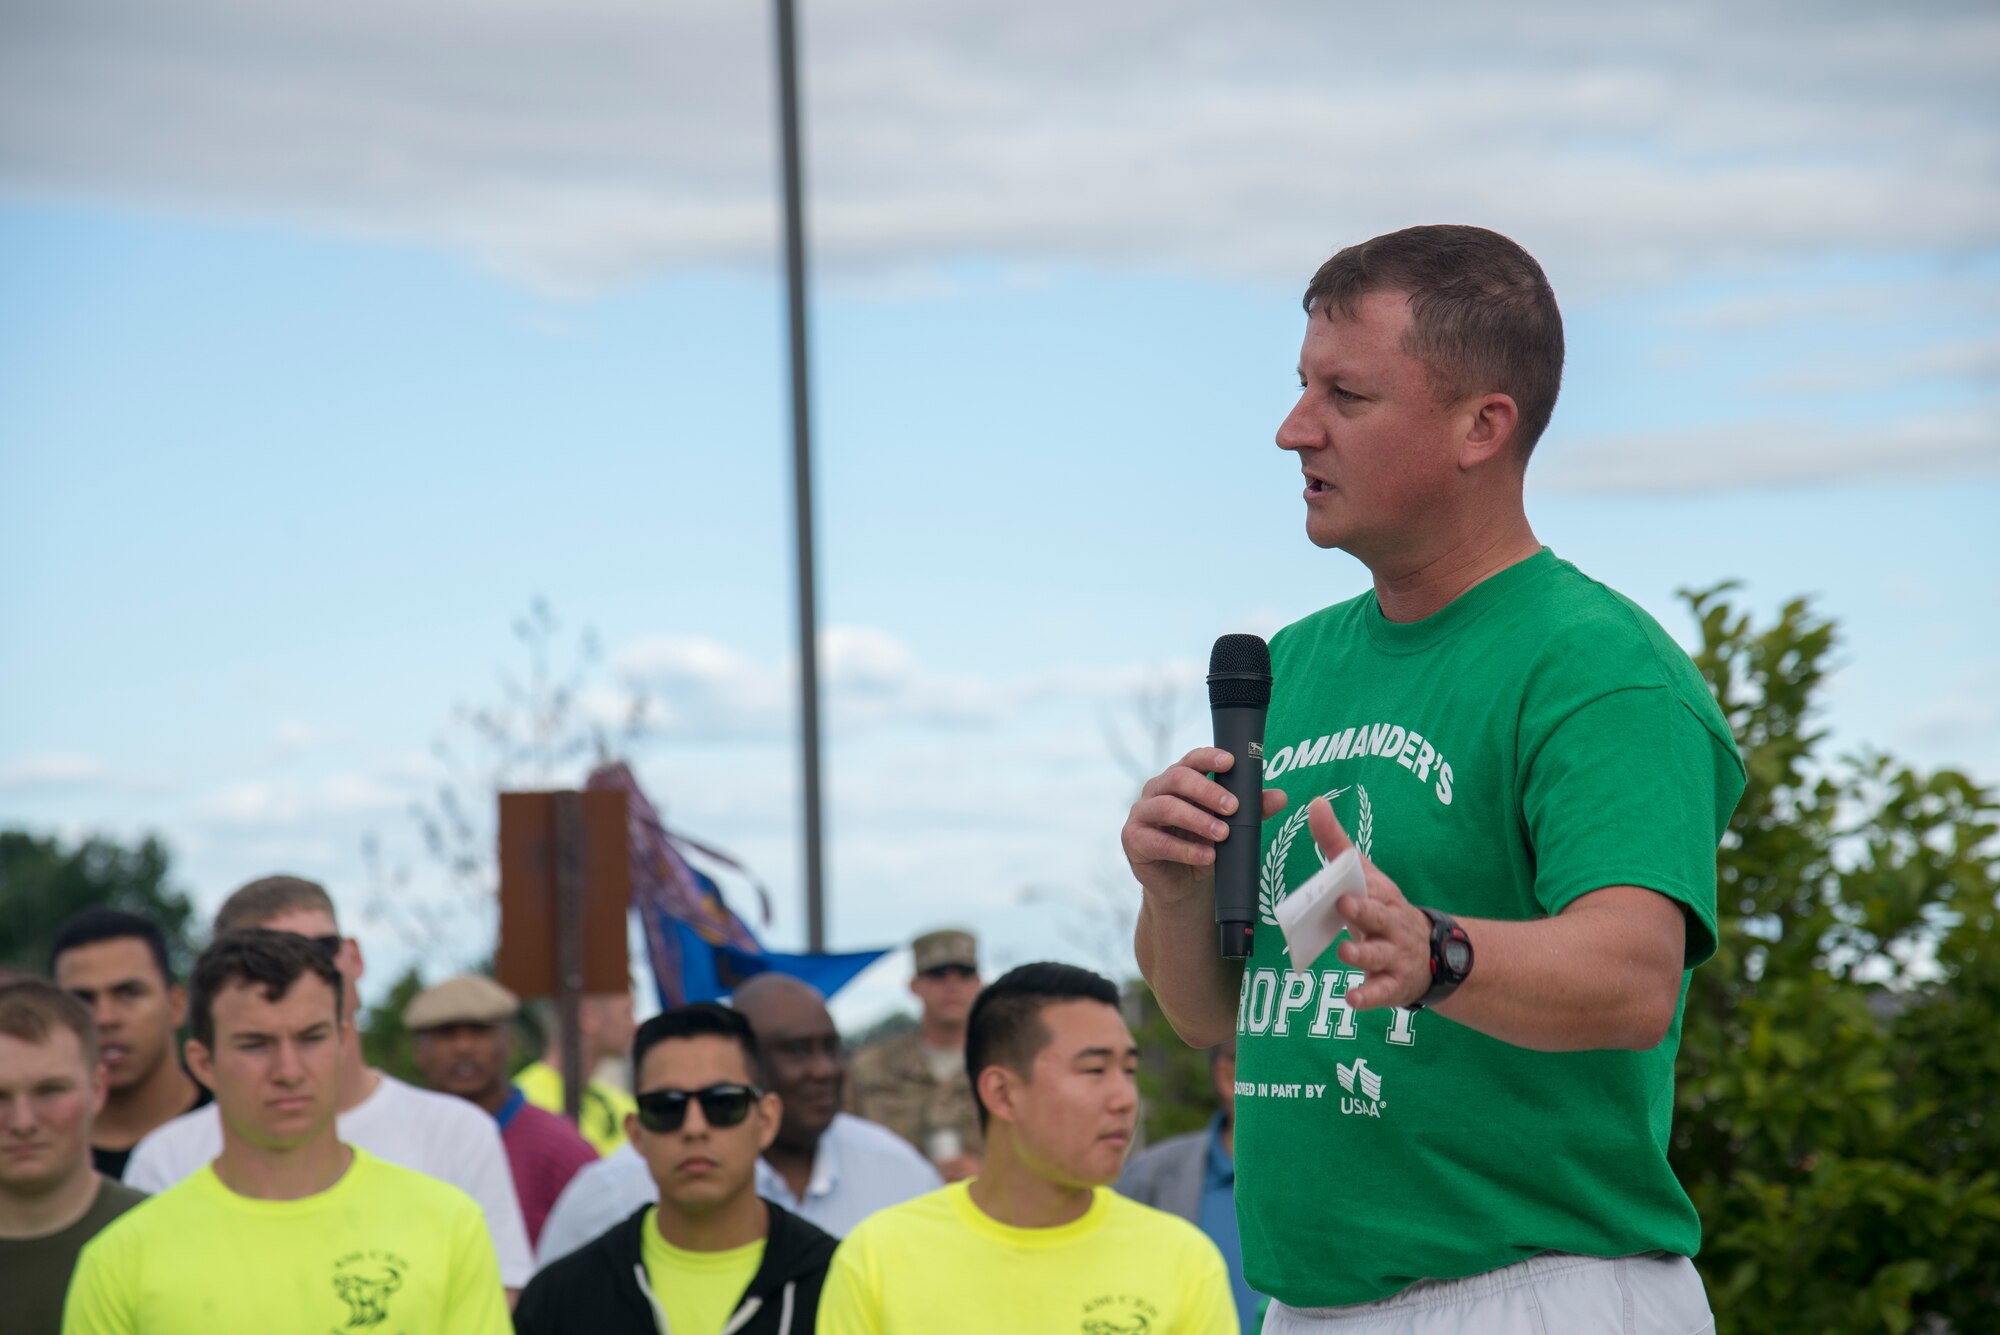 Col. Jones speaks to a crowd of Airmen who have gathered for Sports Day June 14, 2019 at Dover Air Force Base, Del. Jones gave the opening remarks after a quick mile warmup run to begin this year’s Sports Day, which is the first since 2008. (U.S. Air Force photo by A1C Jonathan Harding)